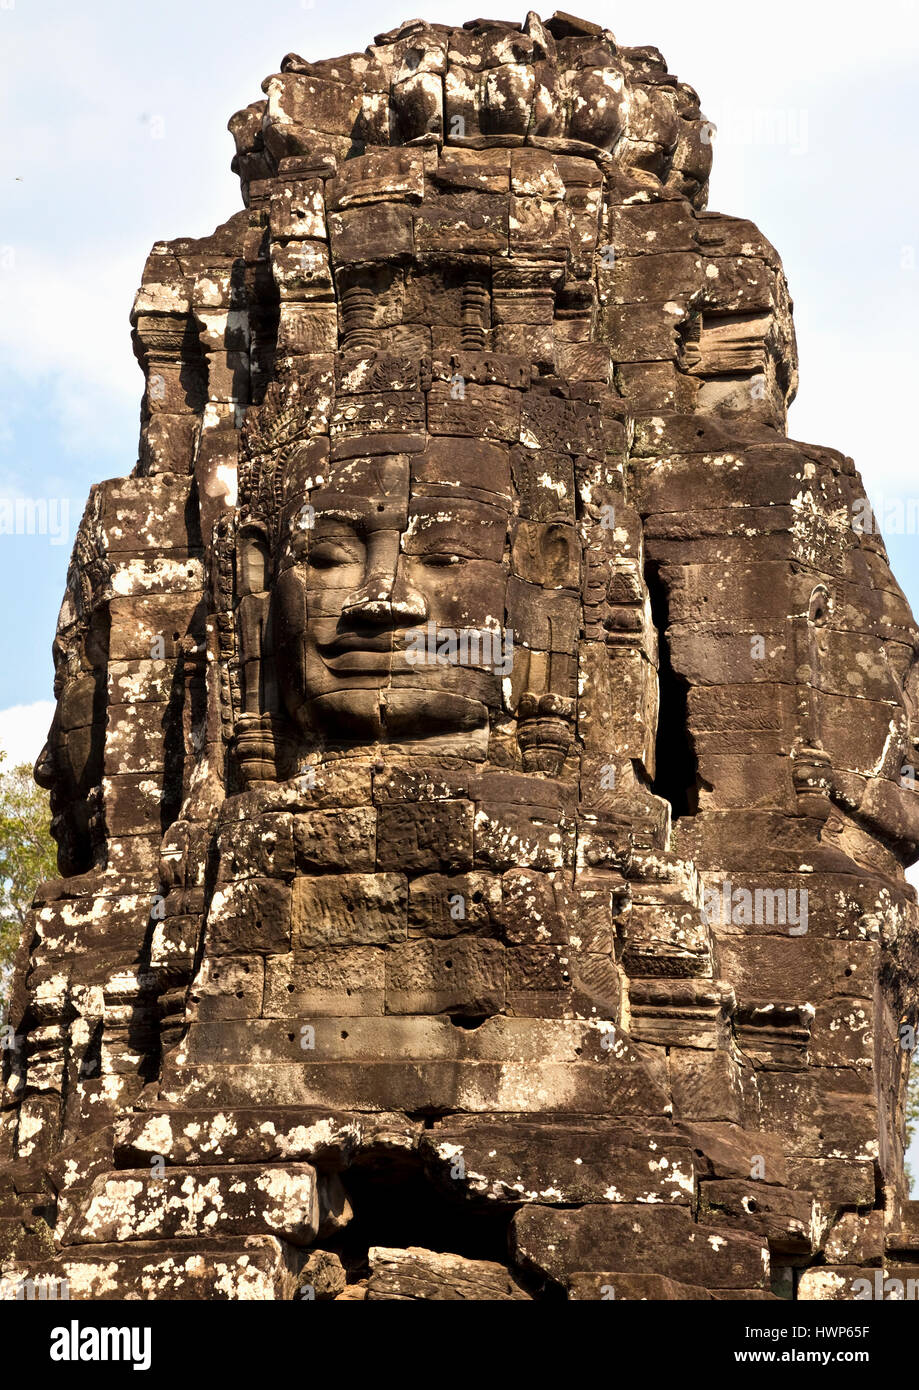 One of the many faces at the Temple of Bayon at Angkor Thom Stock Photo